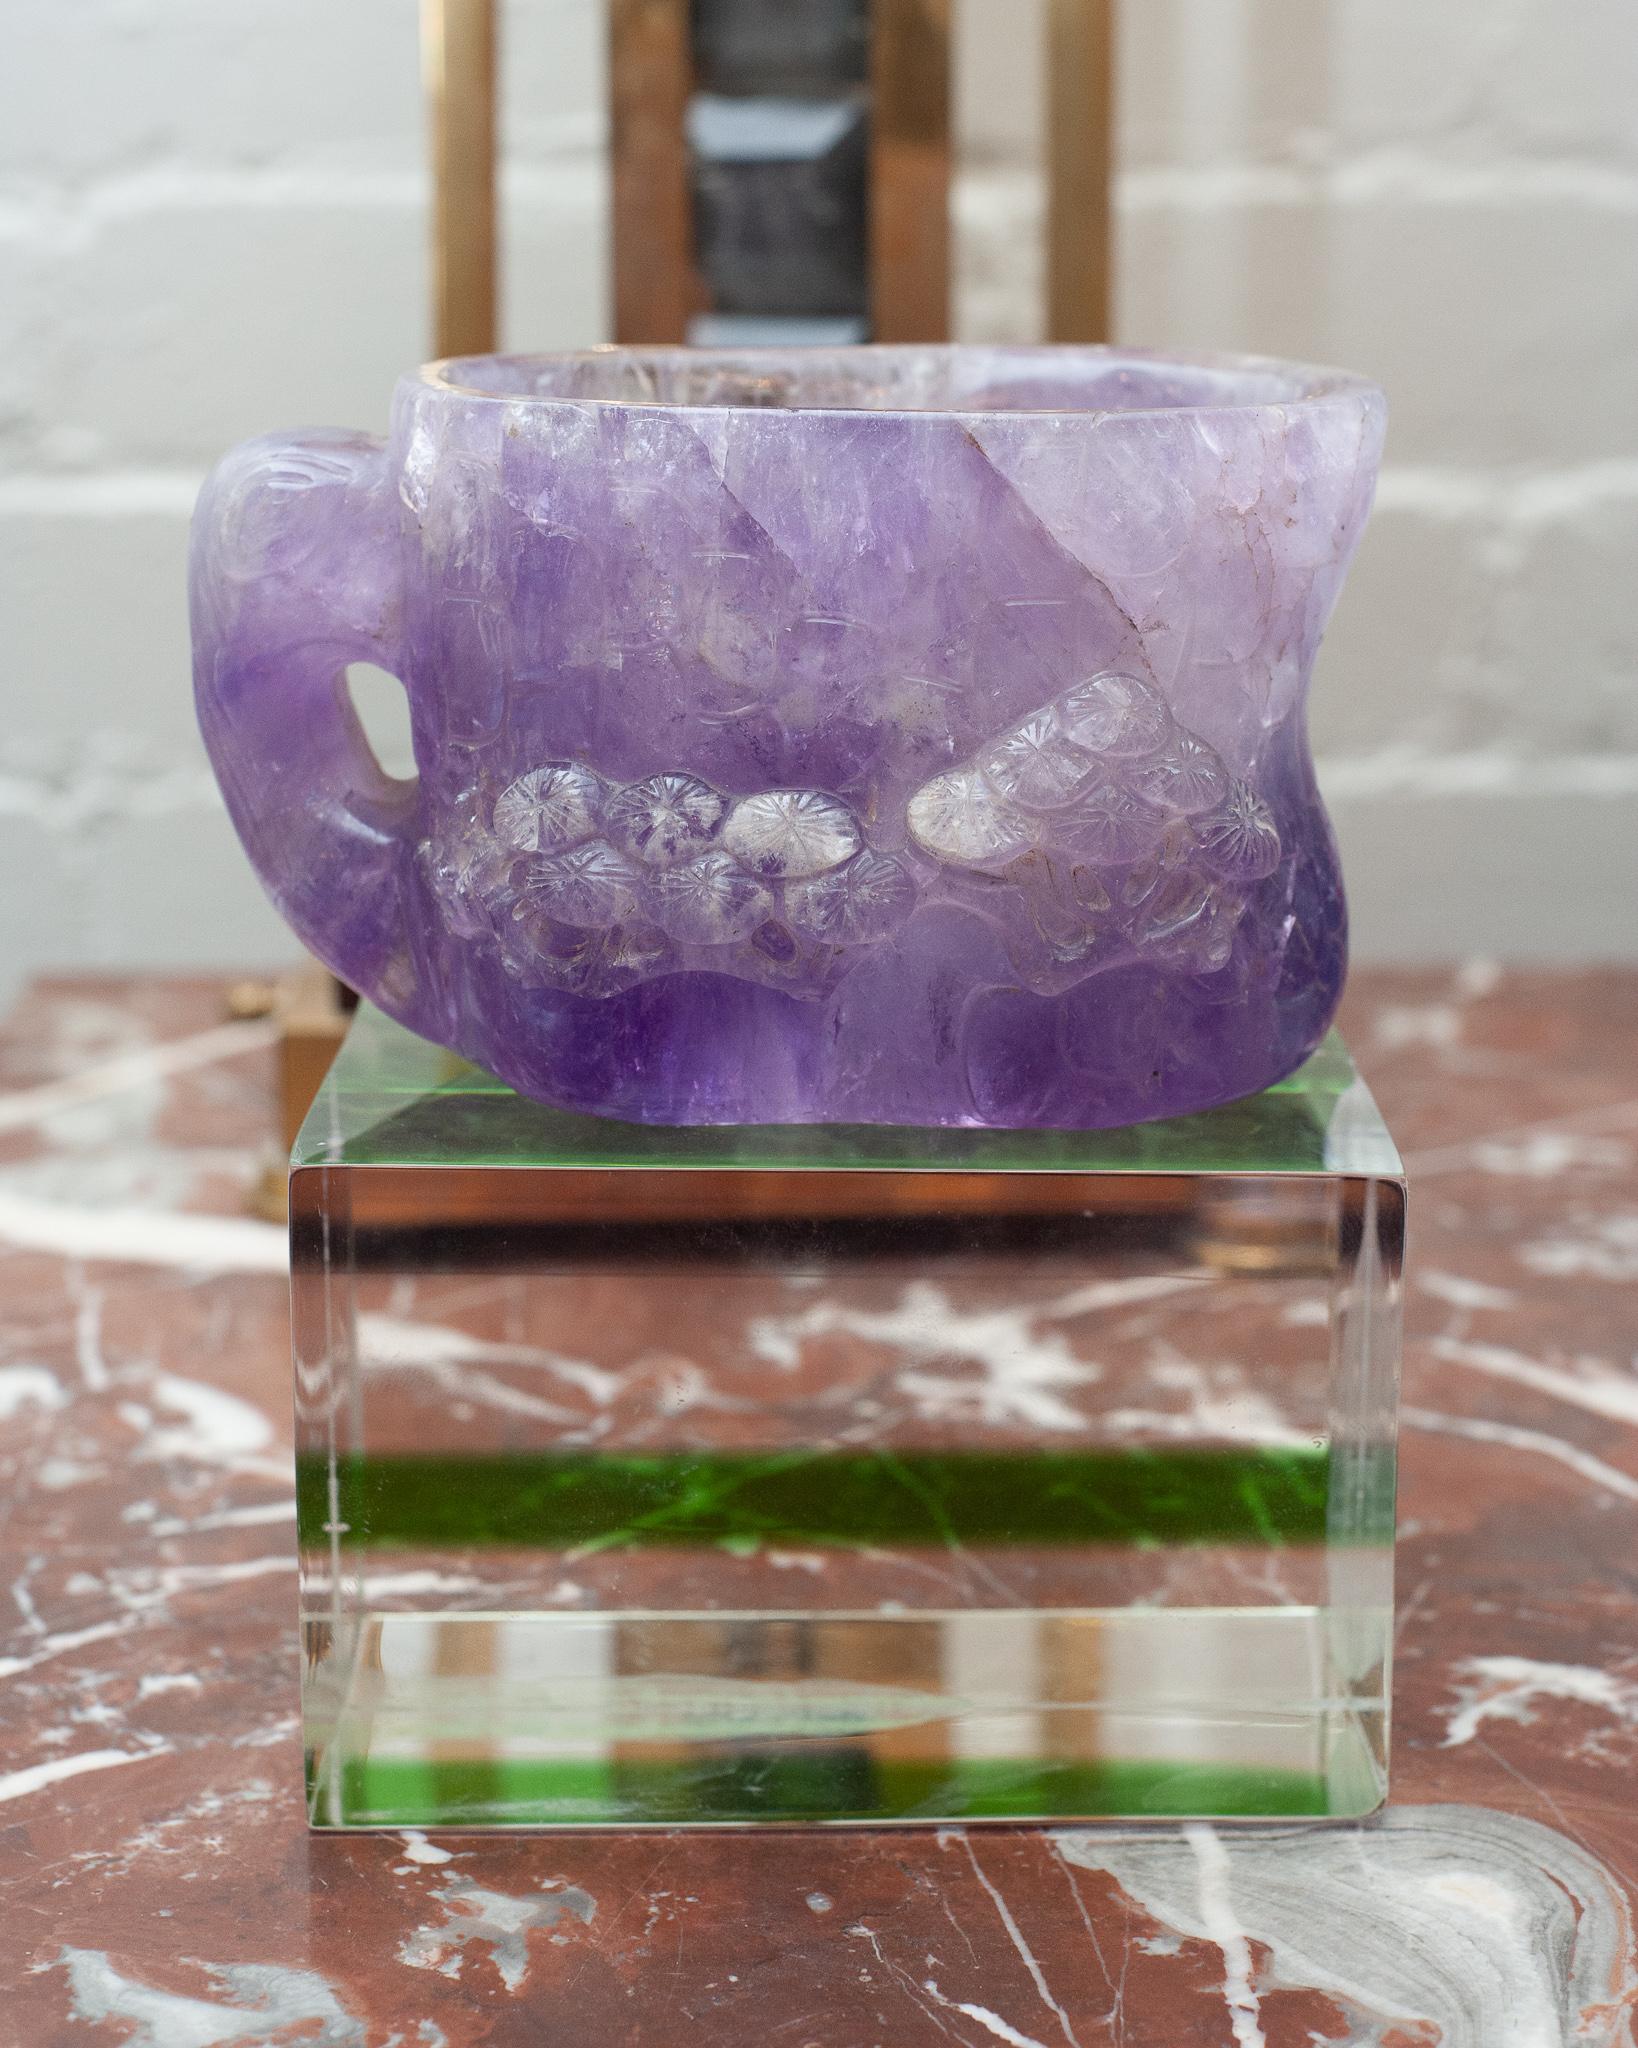 A stunning and unusual antique amethyst carved mug / cup sculpture, with carved mushroom motifs on each side and a detailed handle. This antique carving is made from a solid block of amethyst, and was entirely carved by hand by a master artisan. A